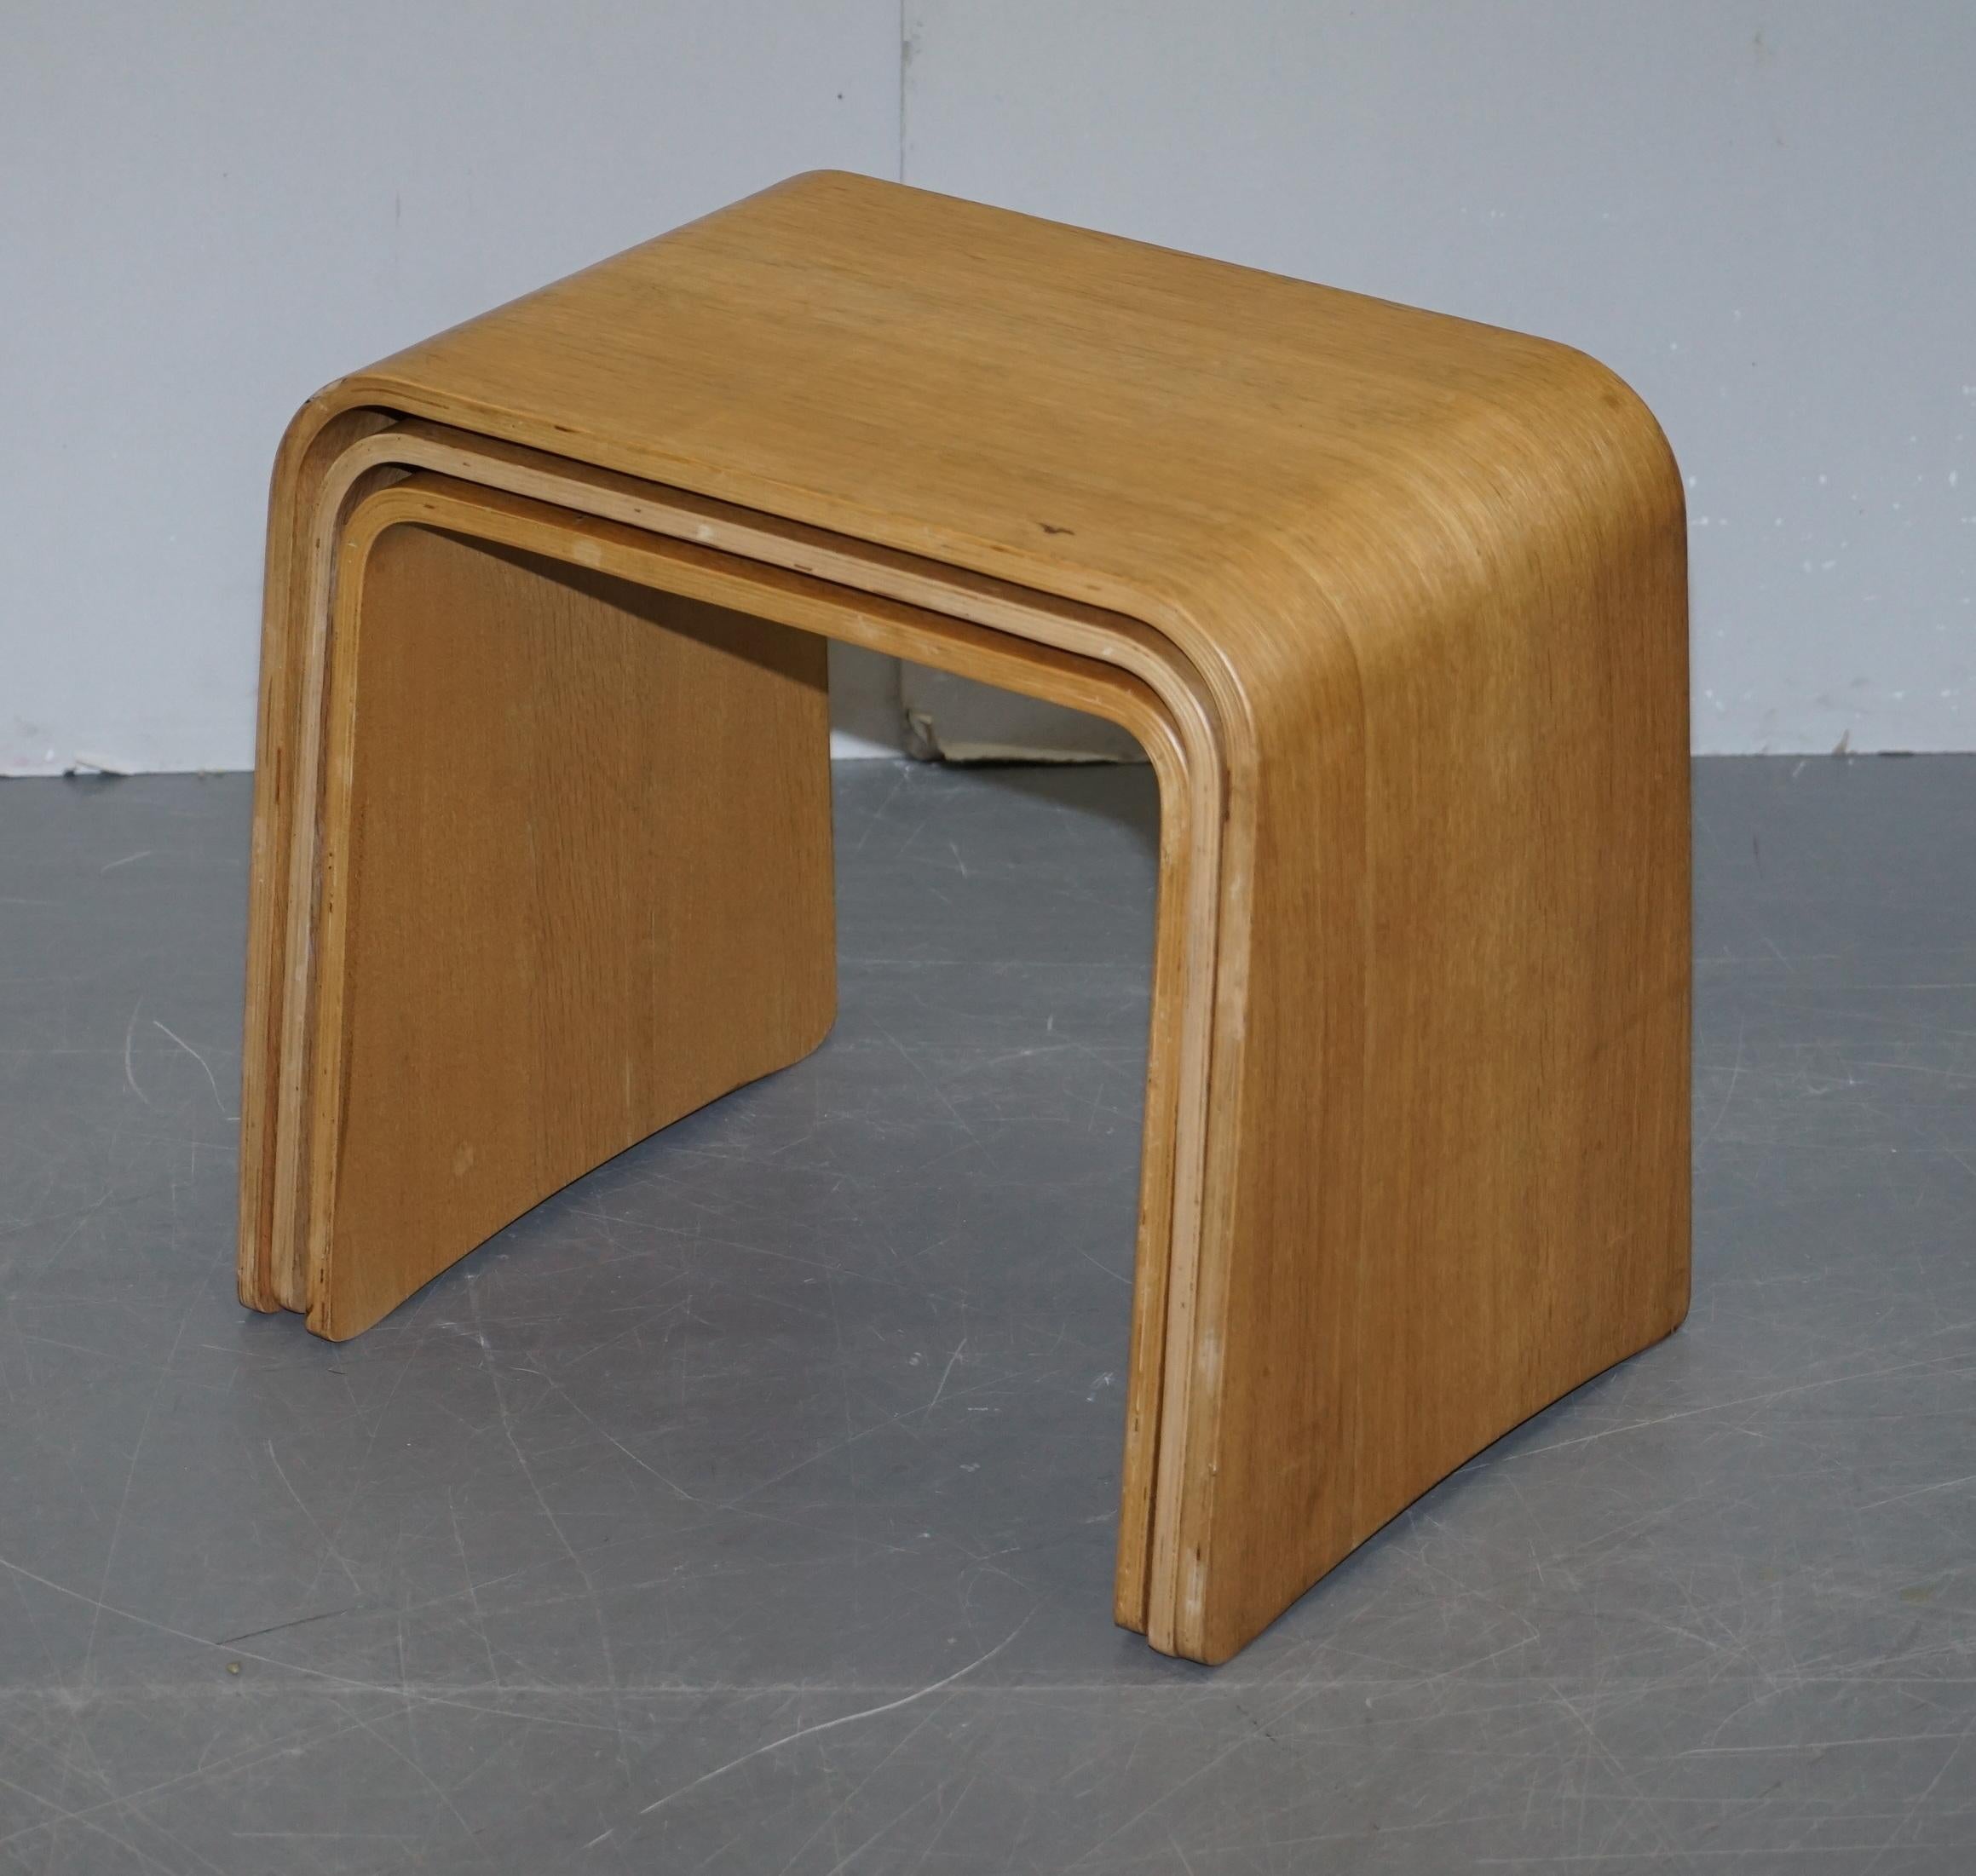 We are delighted to offer for sale this very stylish nest of three bentwood side end lamp tables

A very Mid-Century Modern cool nest of tables, they look good in any setting

We have lightly cleaned waxed and polished them, there will be normal